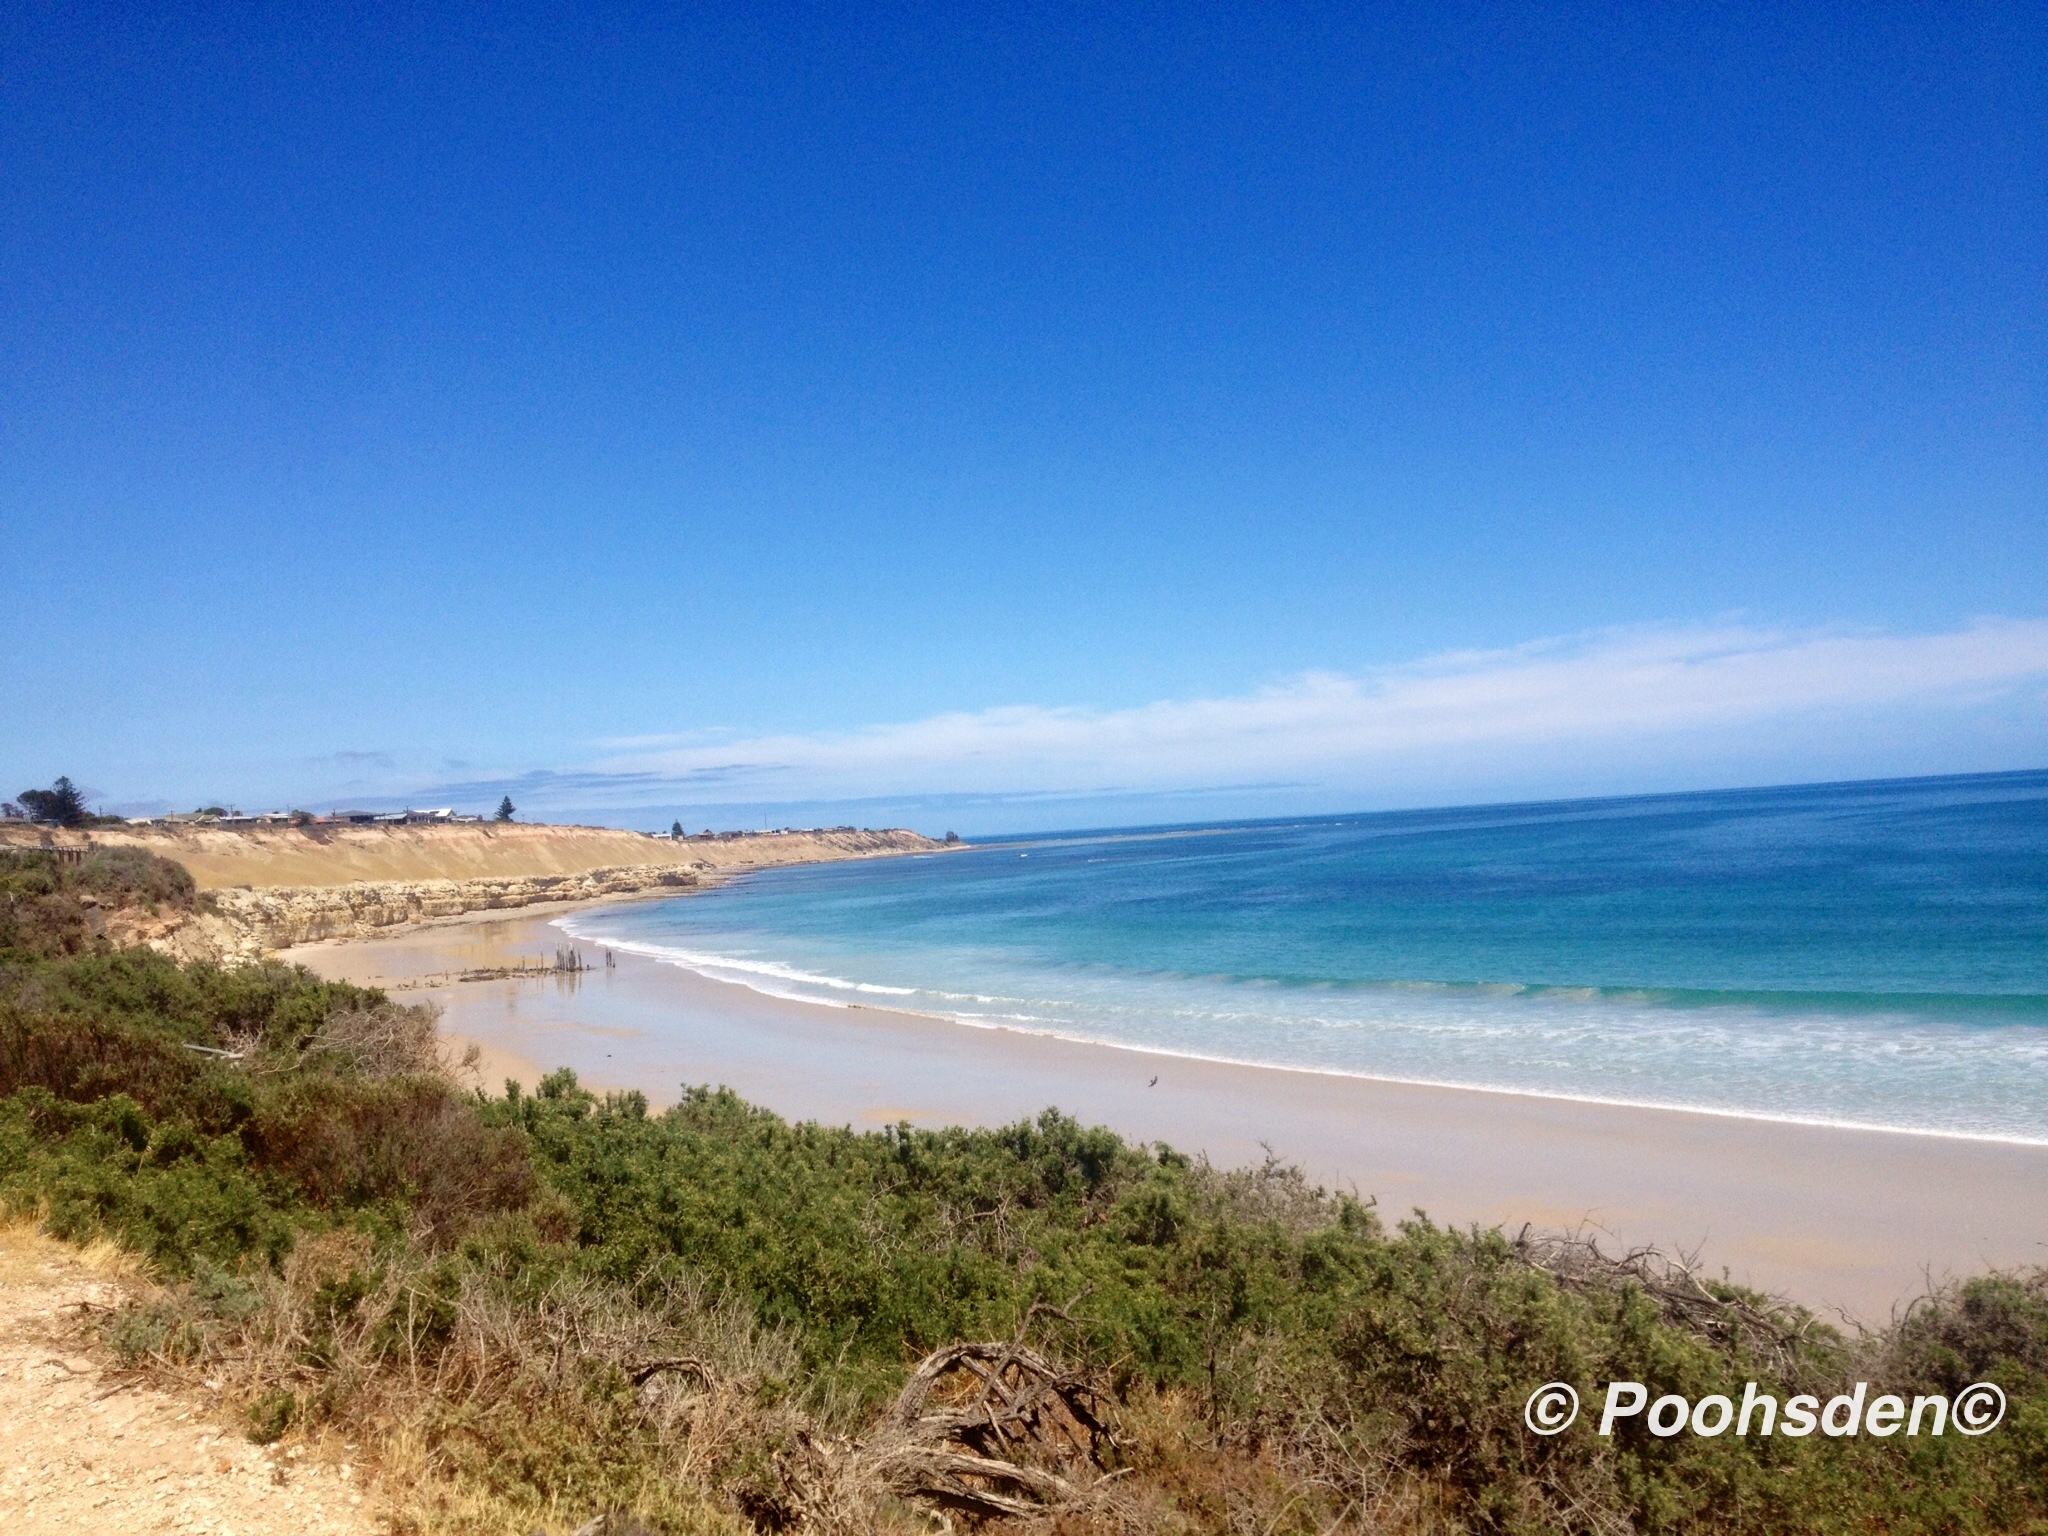 Port Wilunga - the small rounded pebbles washed up on this beach were so pretty